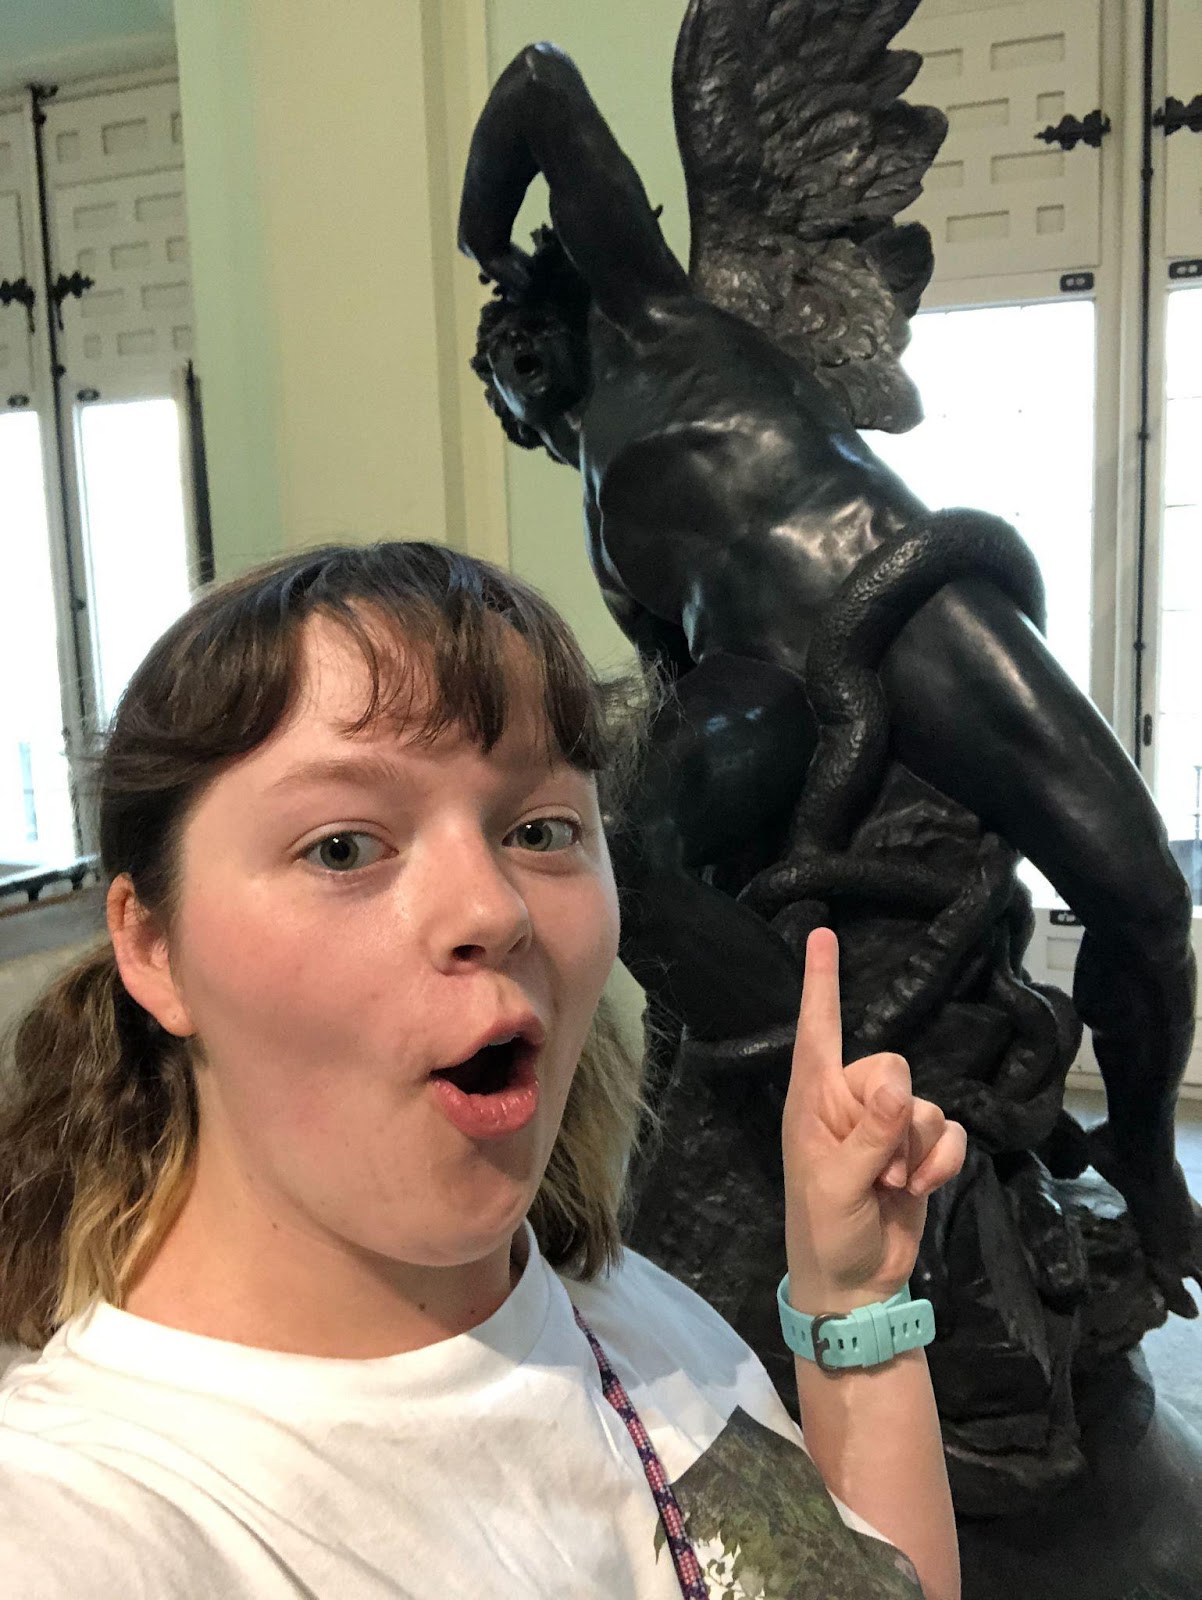 A person taking a selfie with a statue of a horse

Description automatically generated with medium confidence